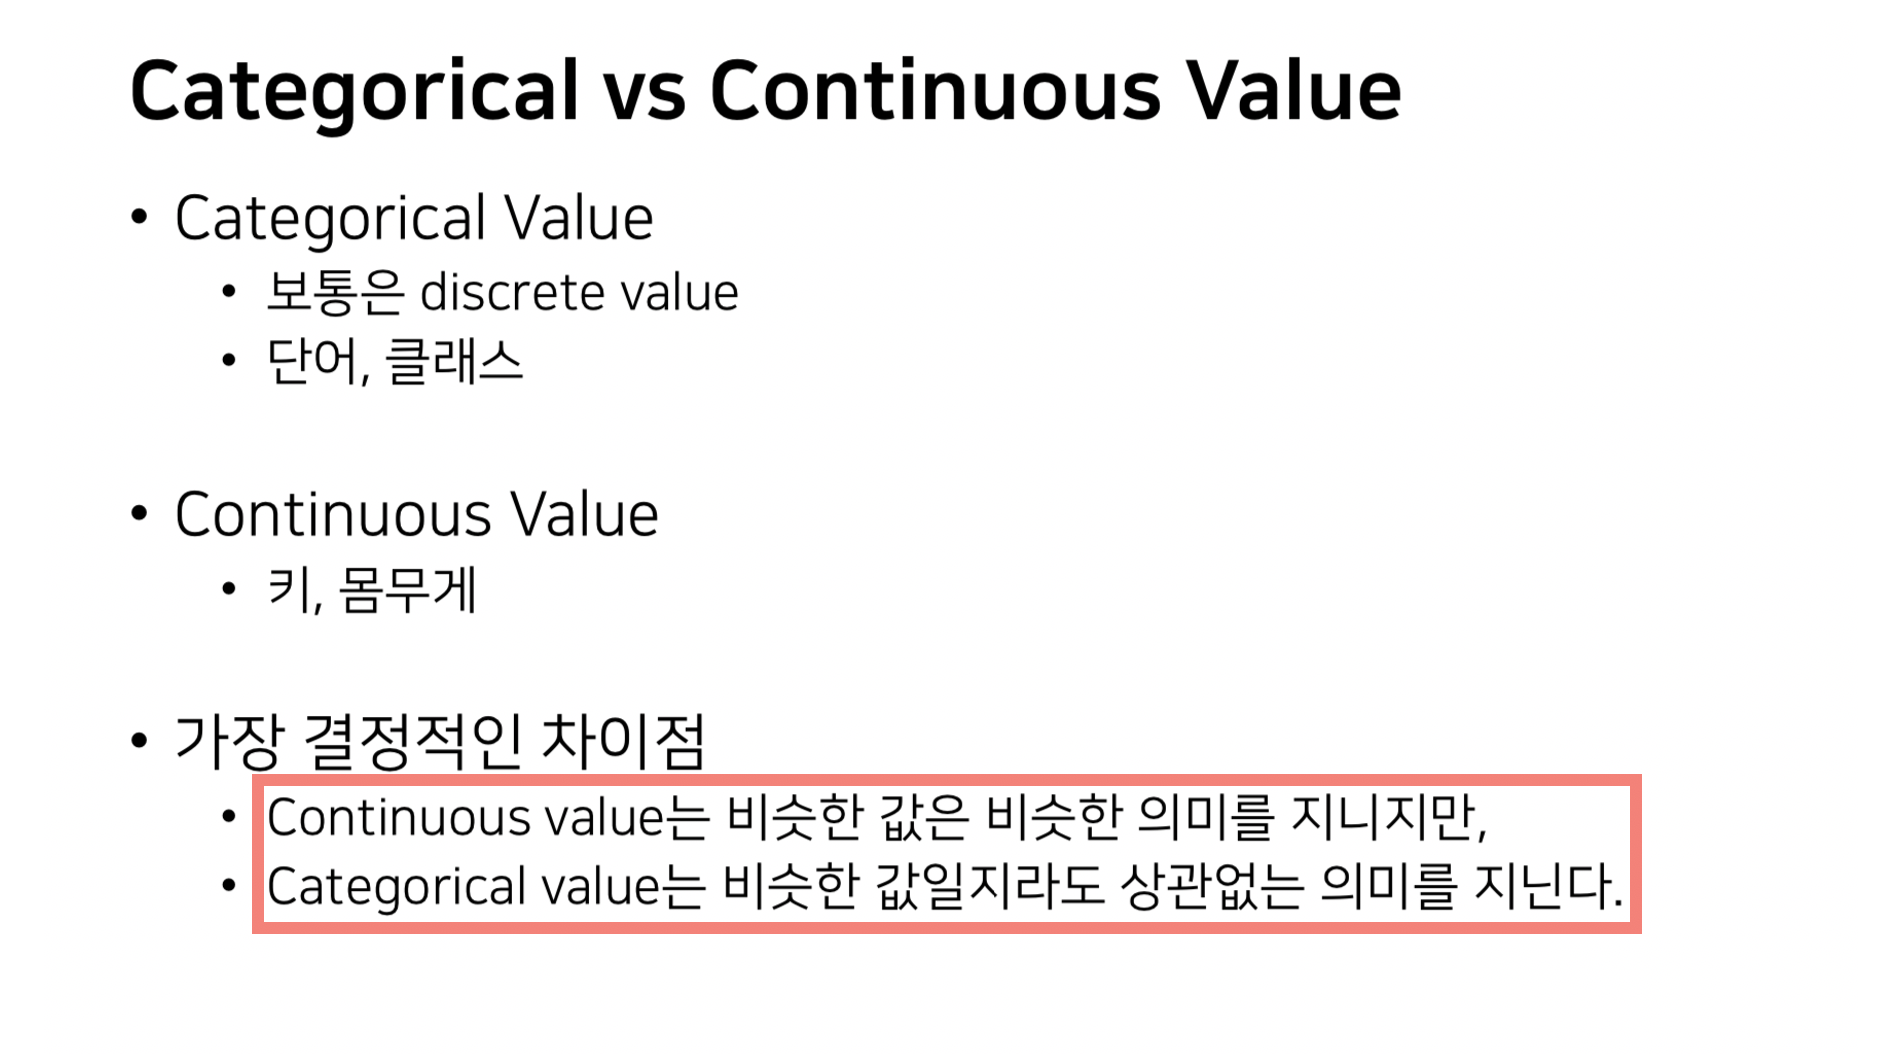 Categorical value vs Continuous value